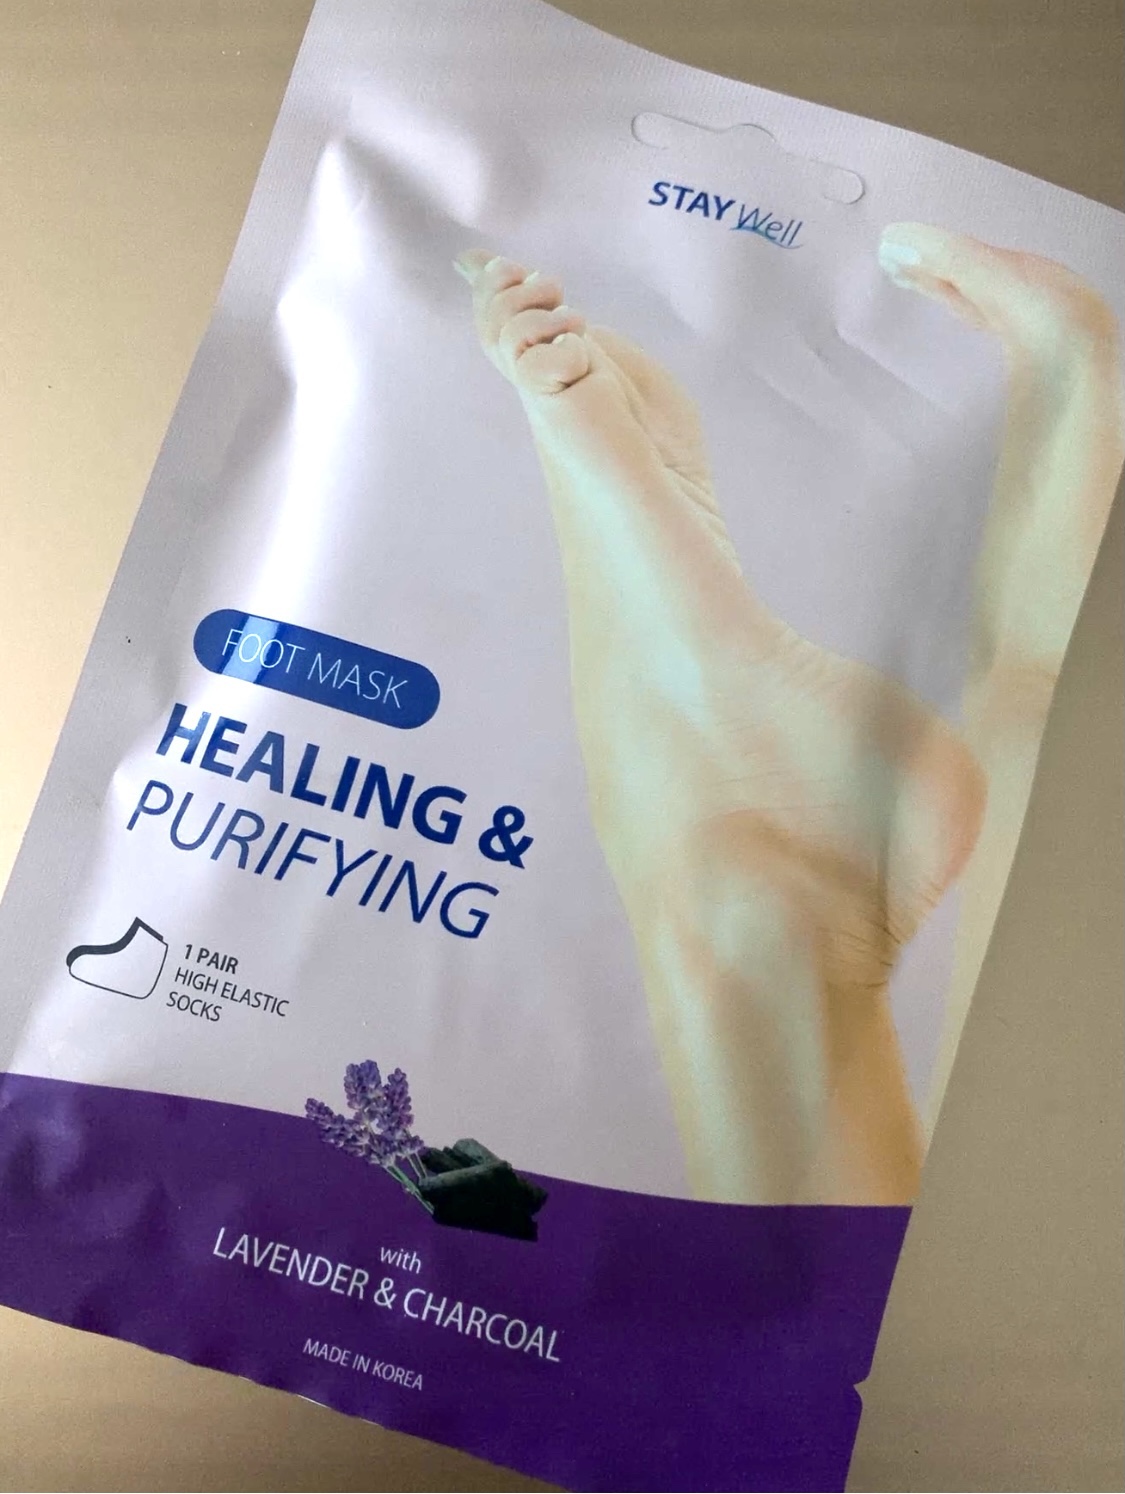 Stay Well footmask healing & purifying